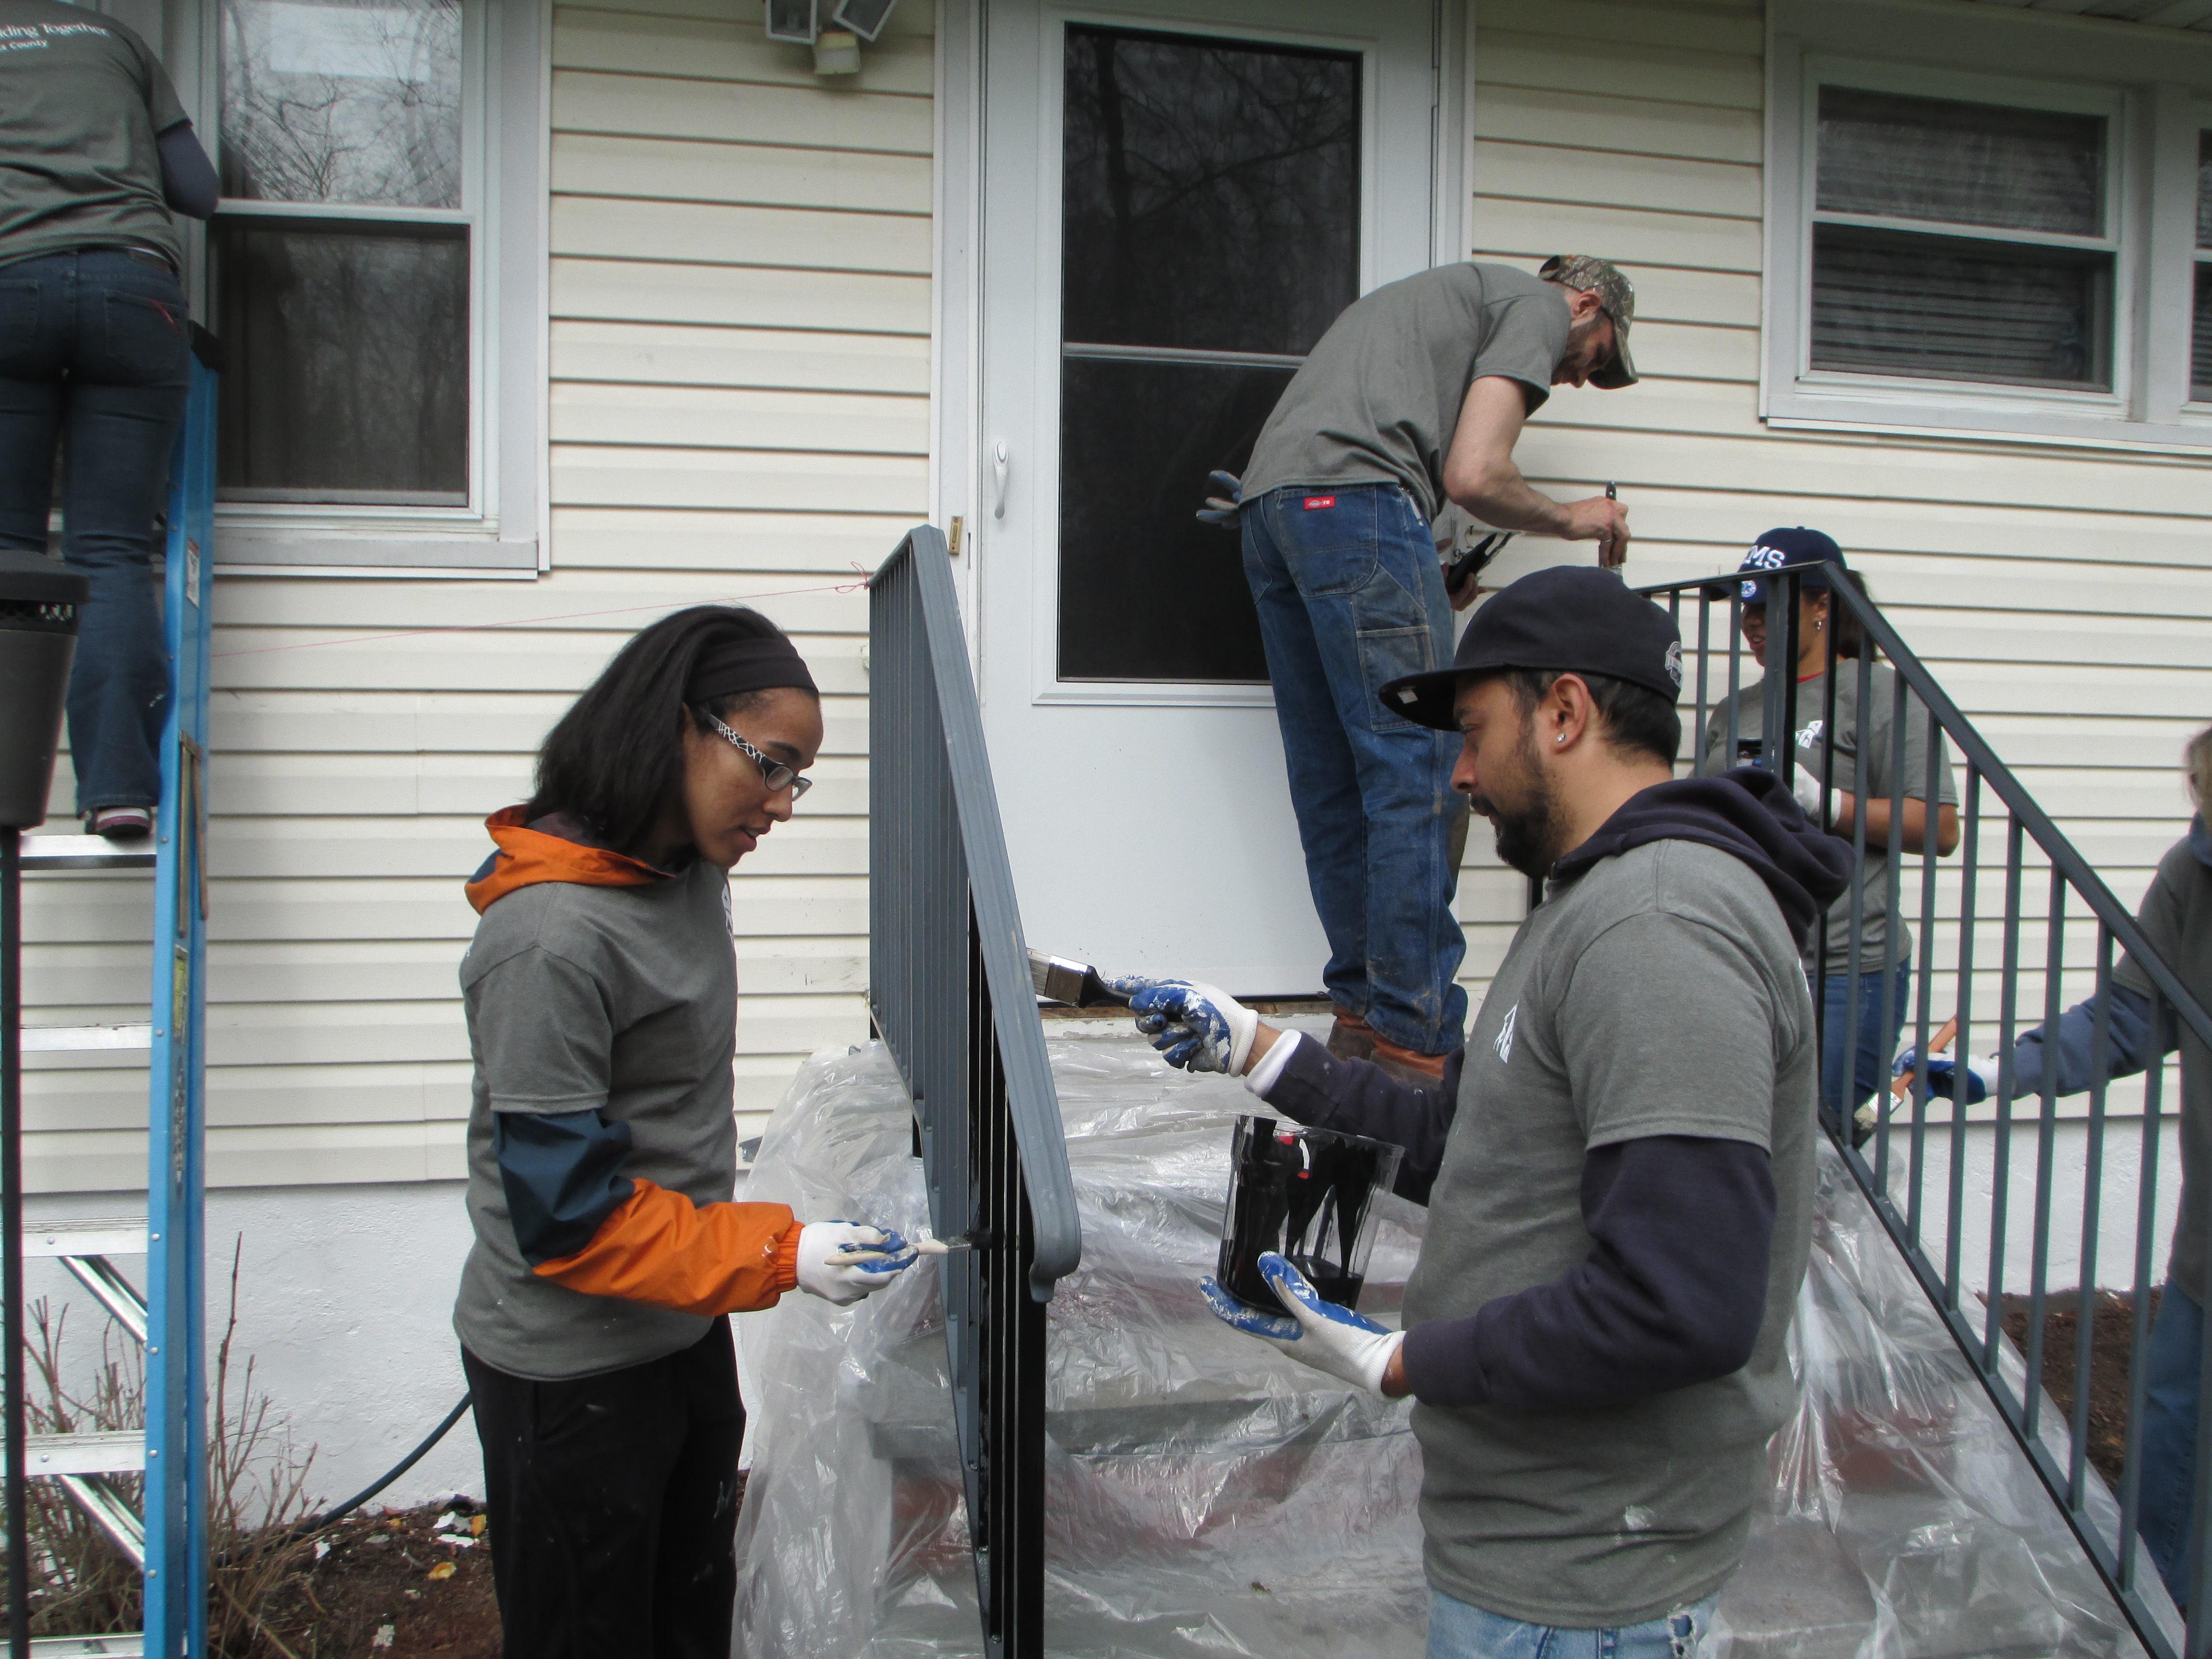 HVCU volunteers fix up the front porch railing for Kim in Poughkeepsie as part of a Rebuilding Day project in 2014.